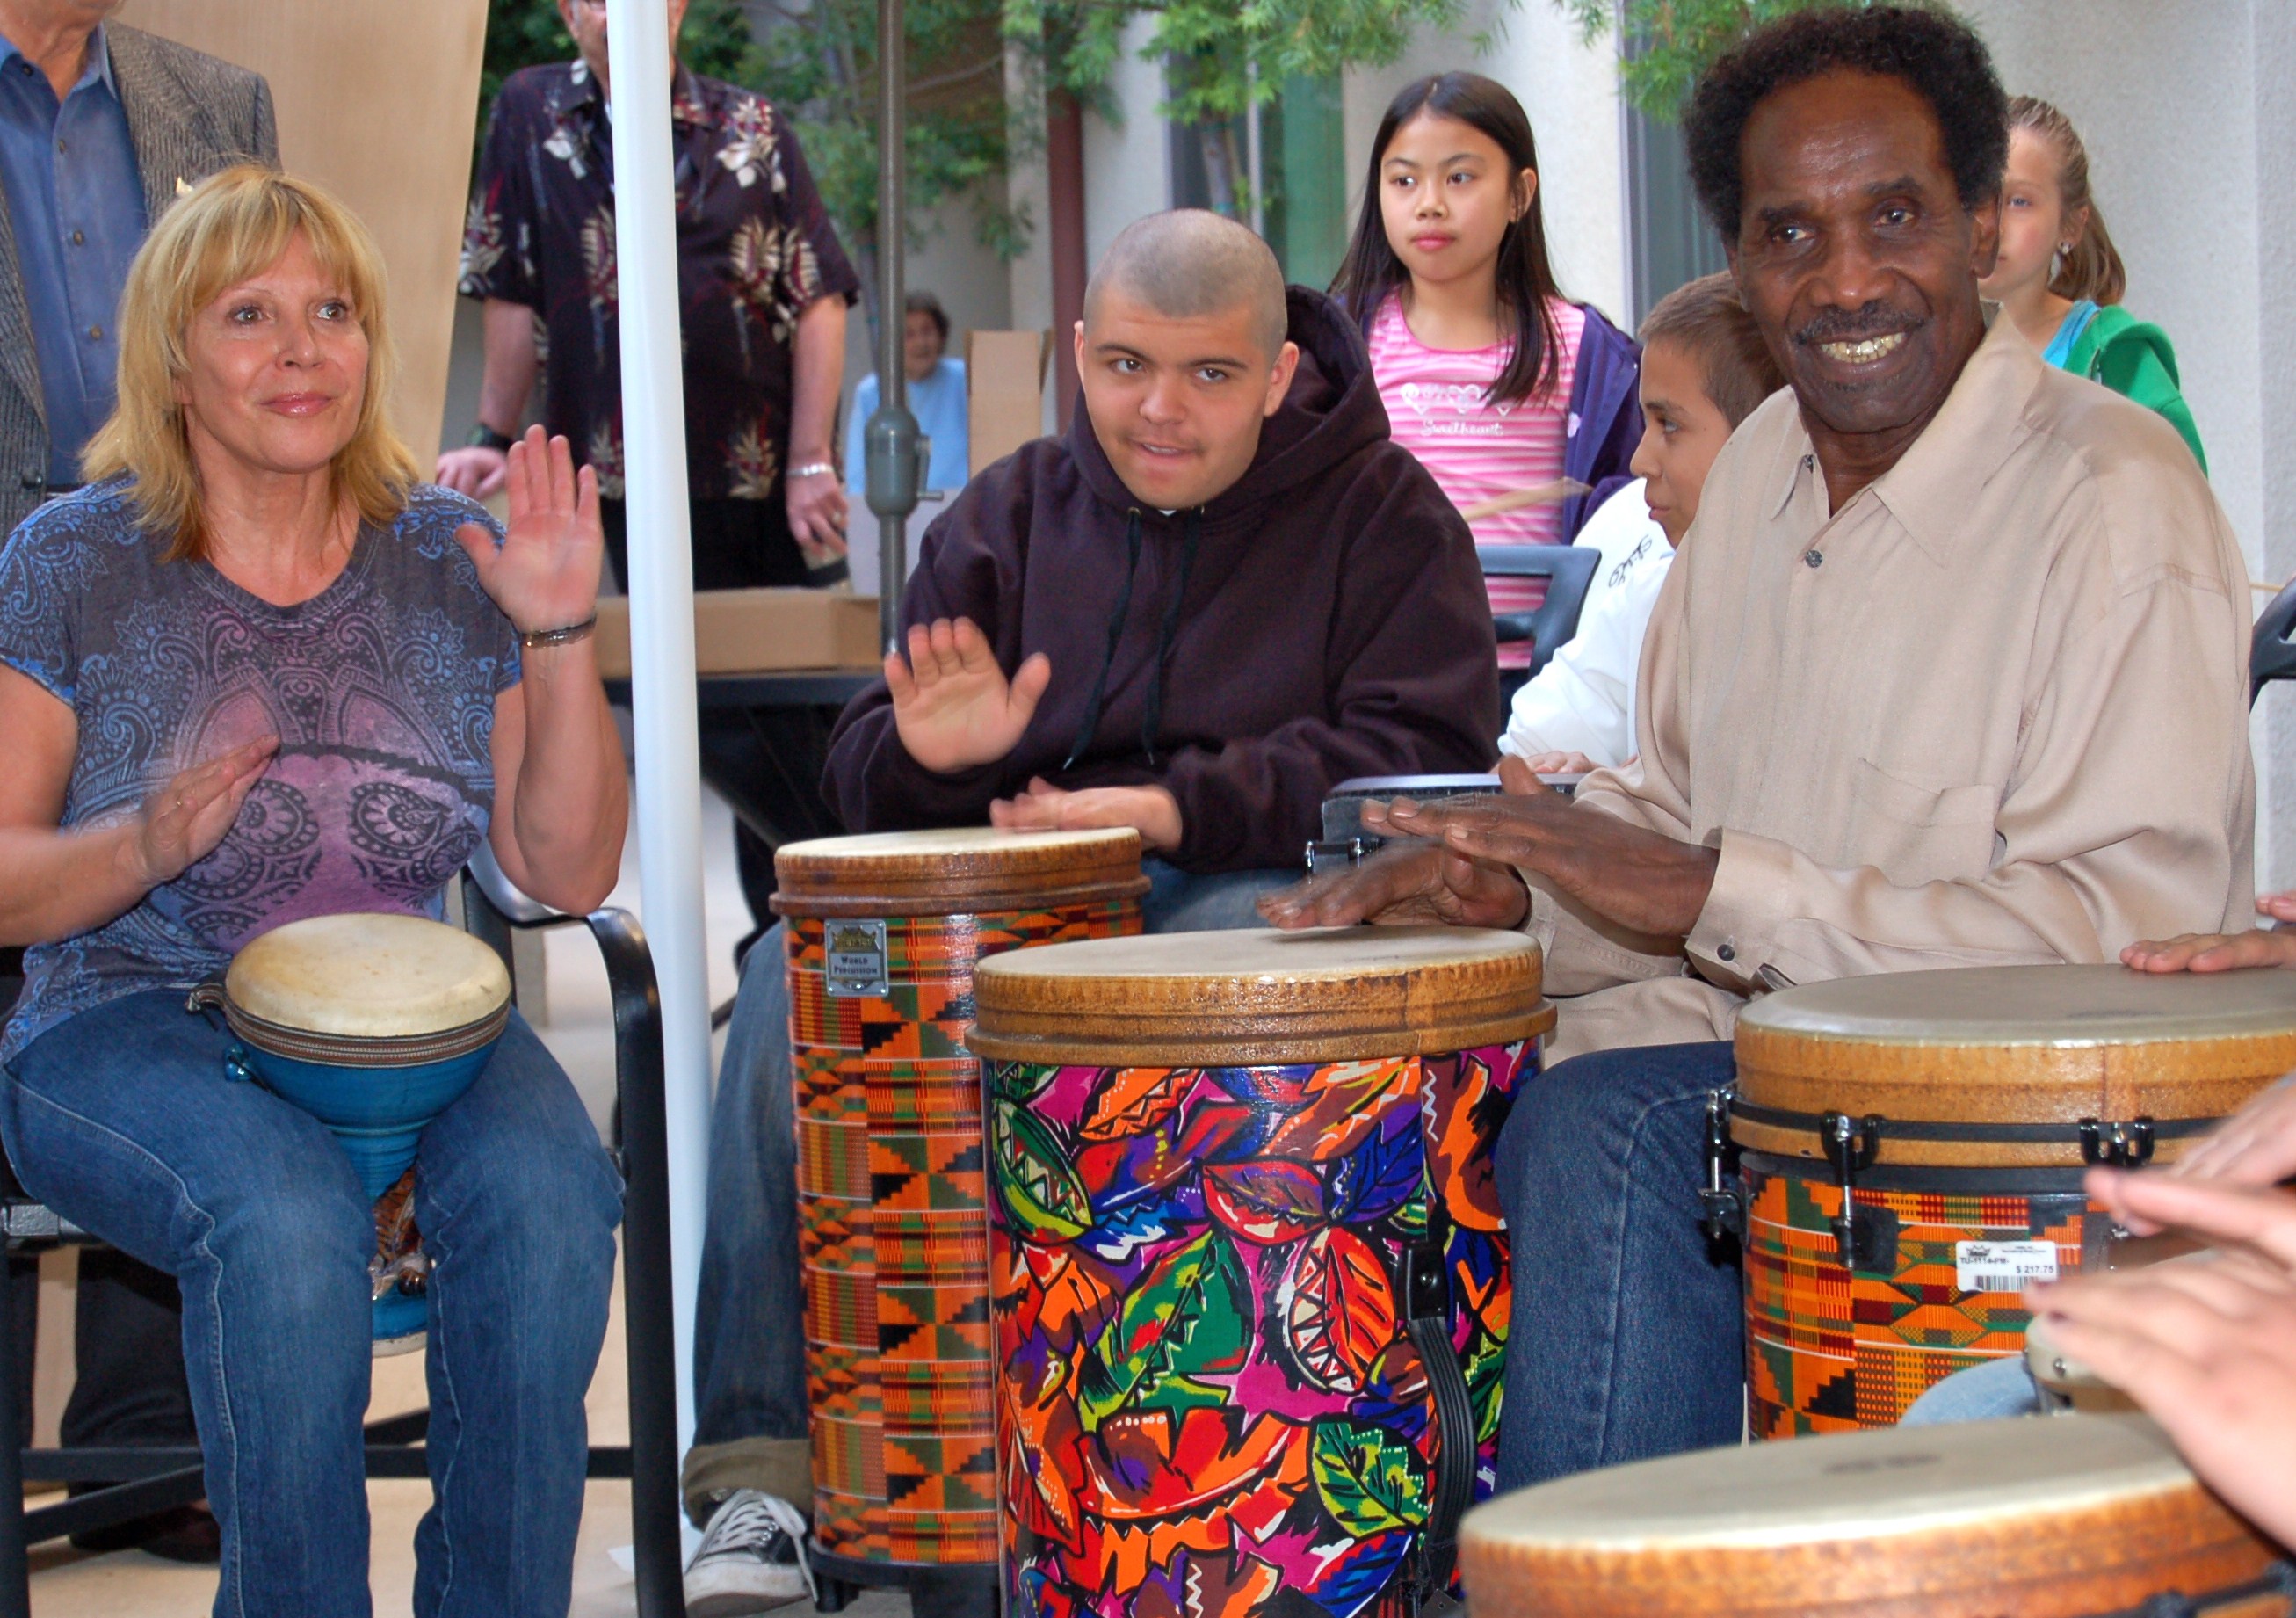 Intergenerational group playing drums.